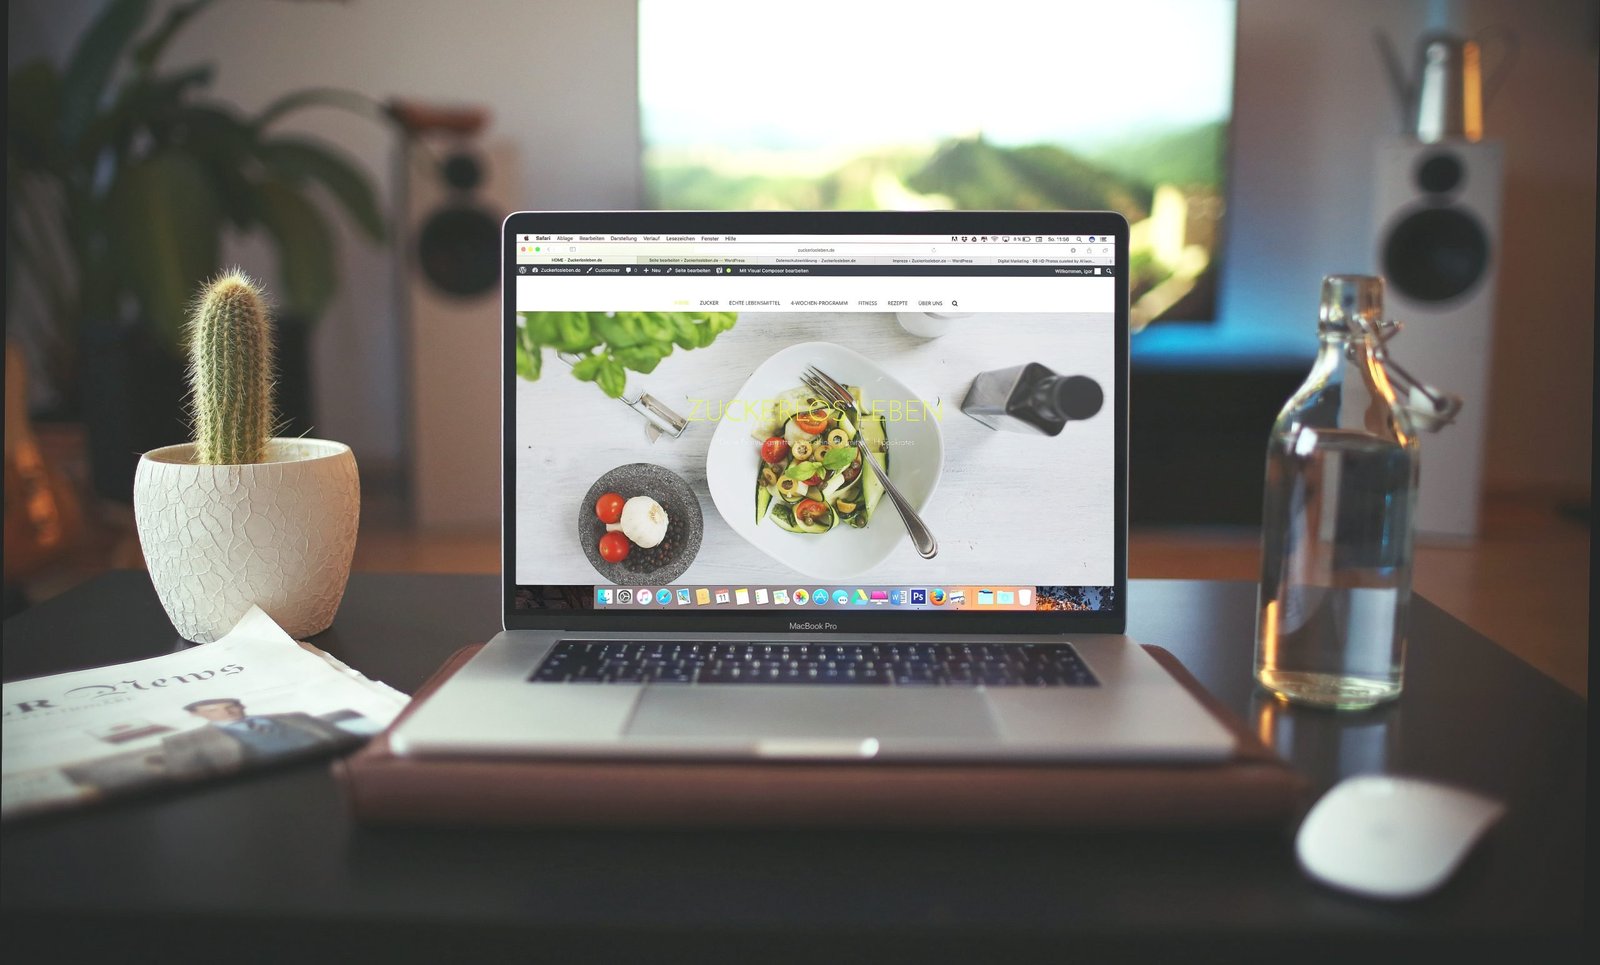 Laptop showing the landing page of a foodie website